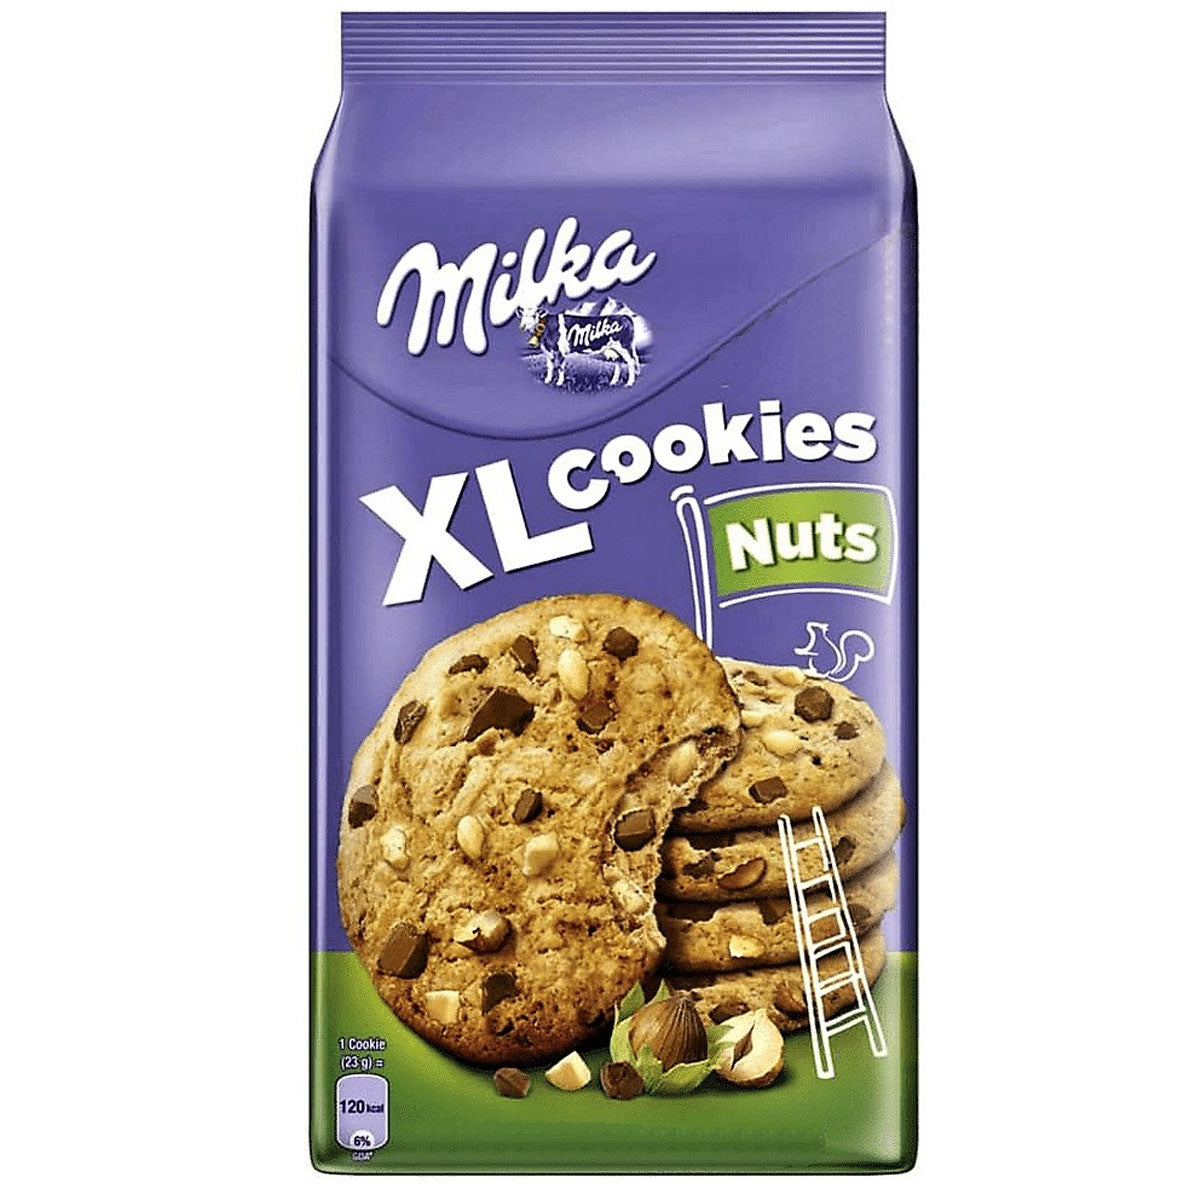 Milka - XL Cookies with Nuts - 184g - Continental Food Store